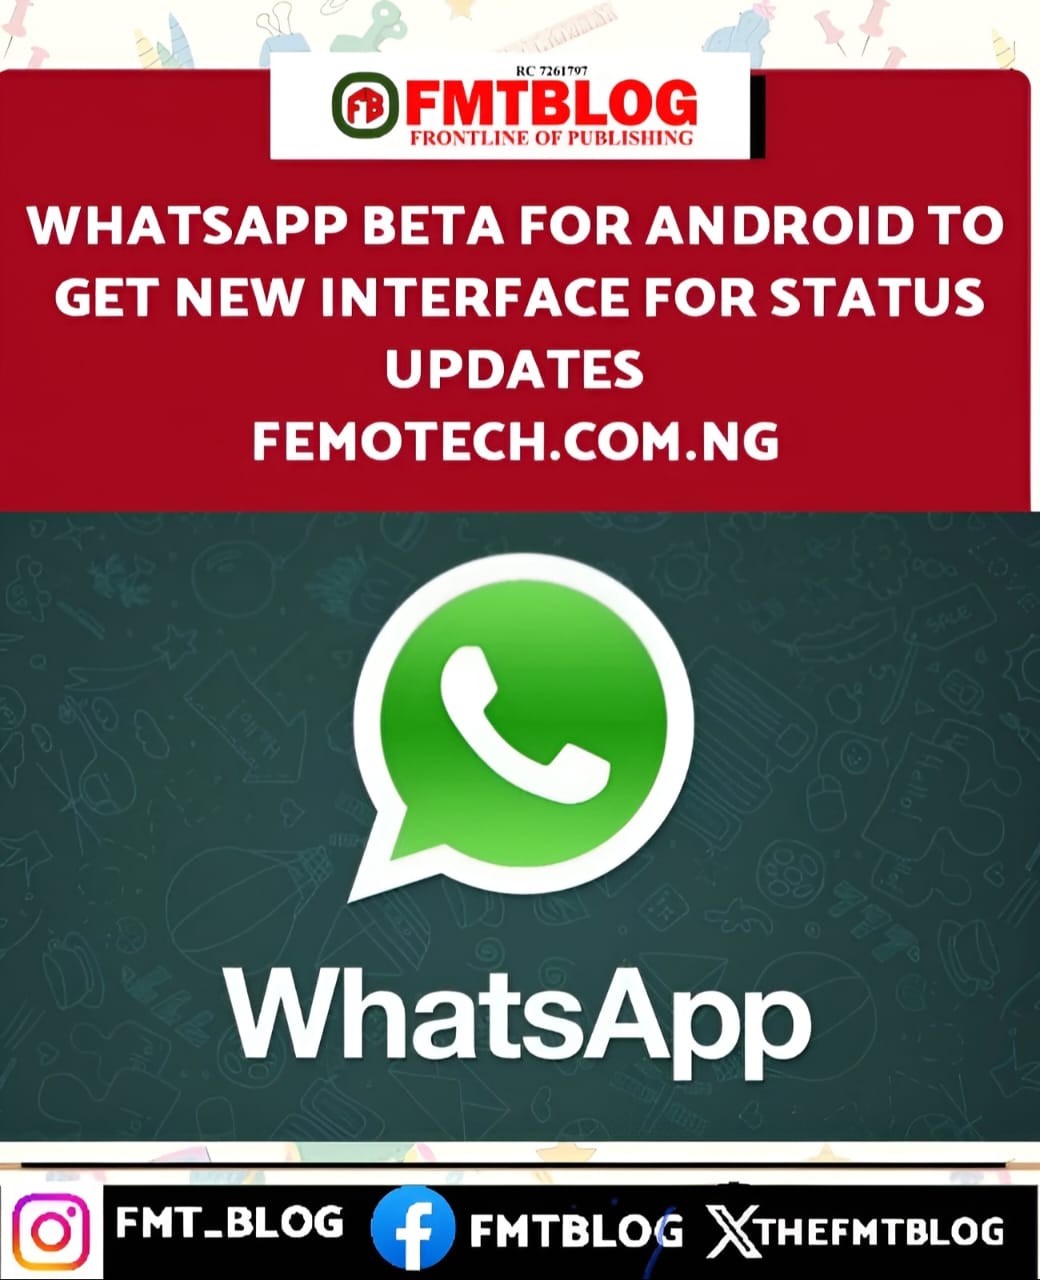 WhatsApp Beta For Android To Get New Interface For Status Updates